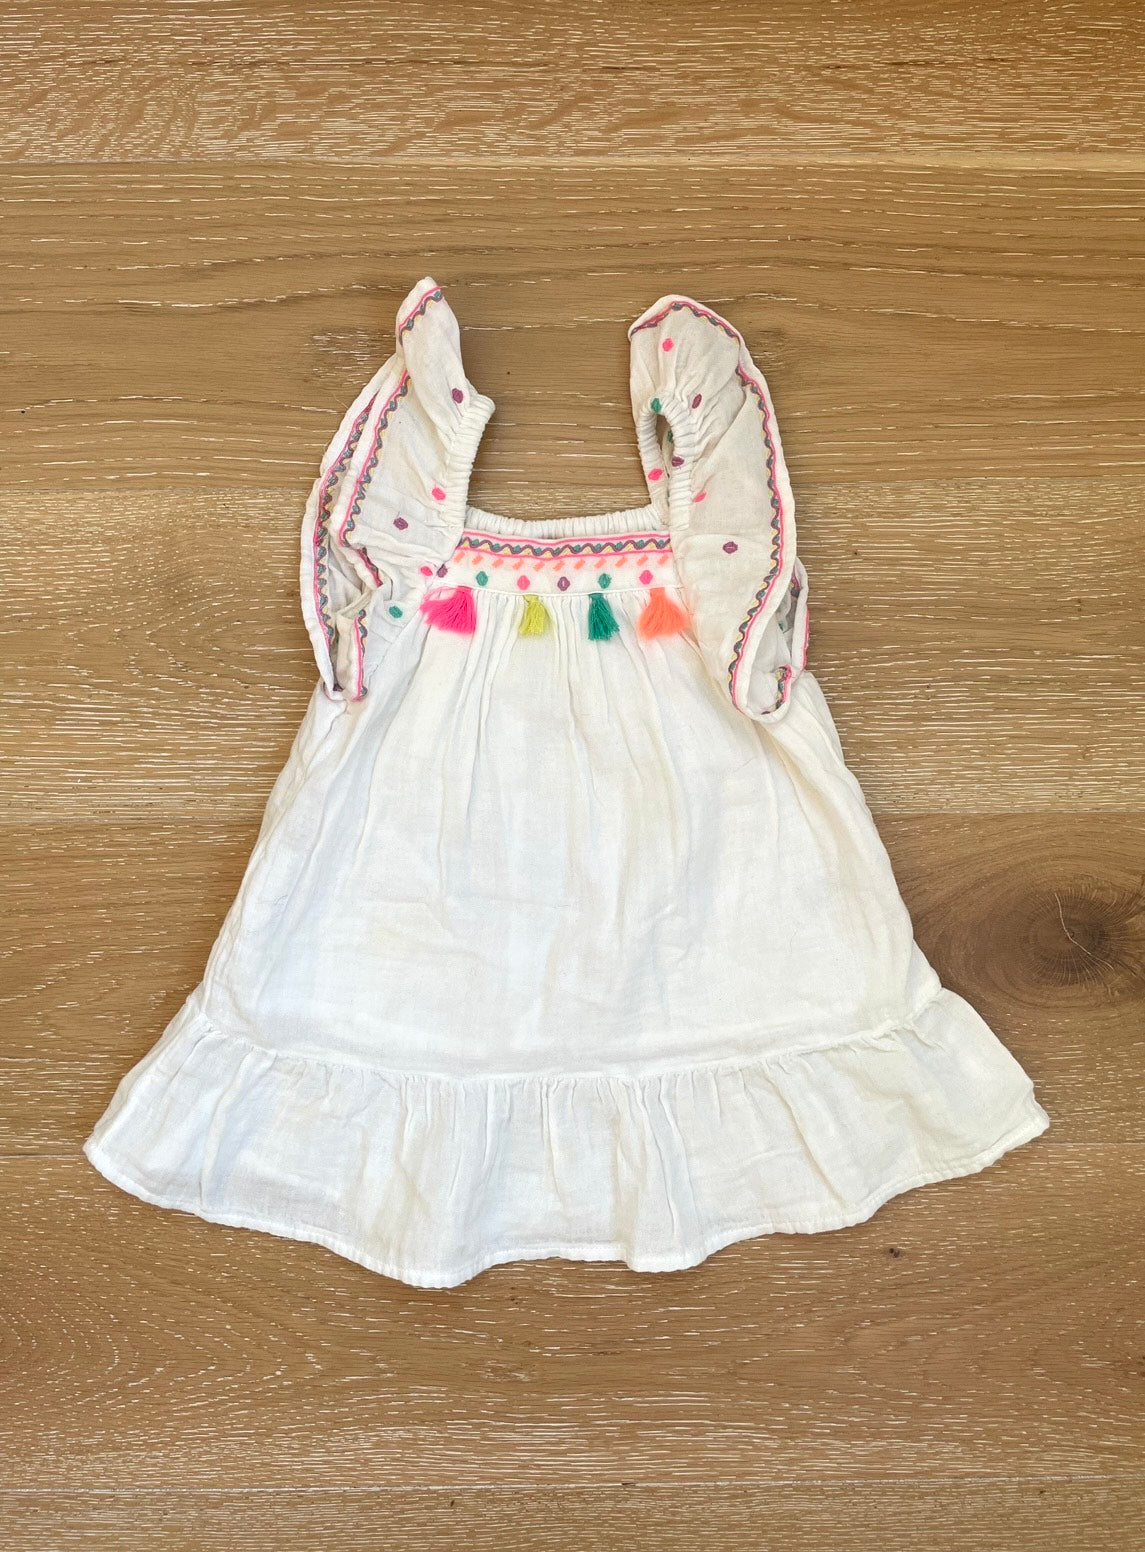 Cat & Jack Worn Once Girls White Dress Color Ruffle Poms 2T